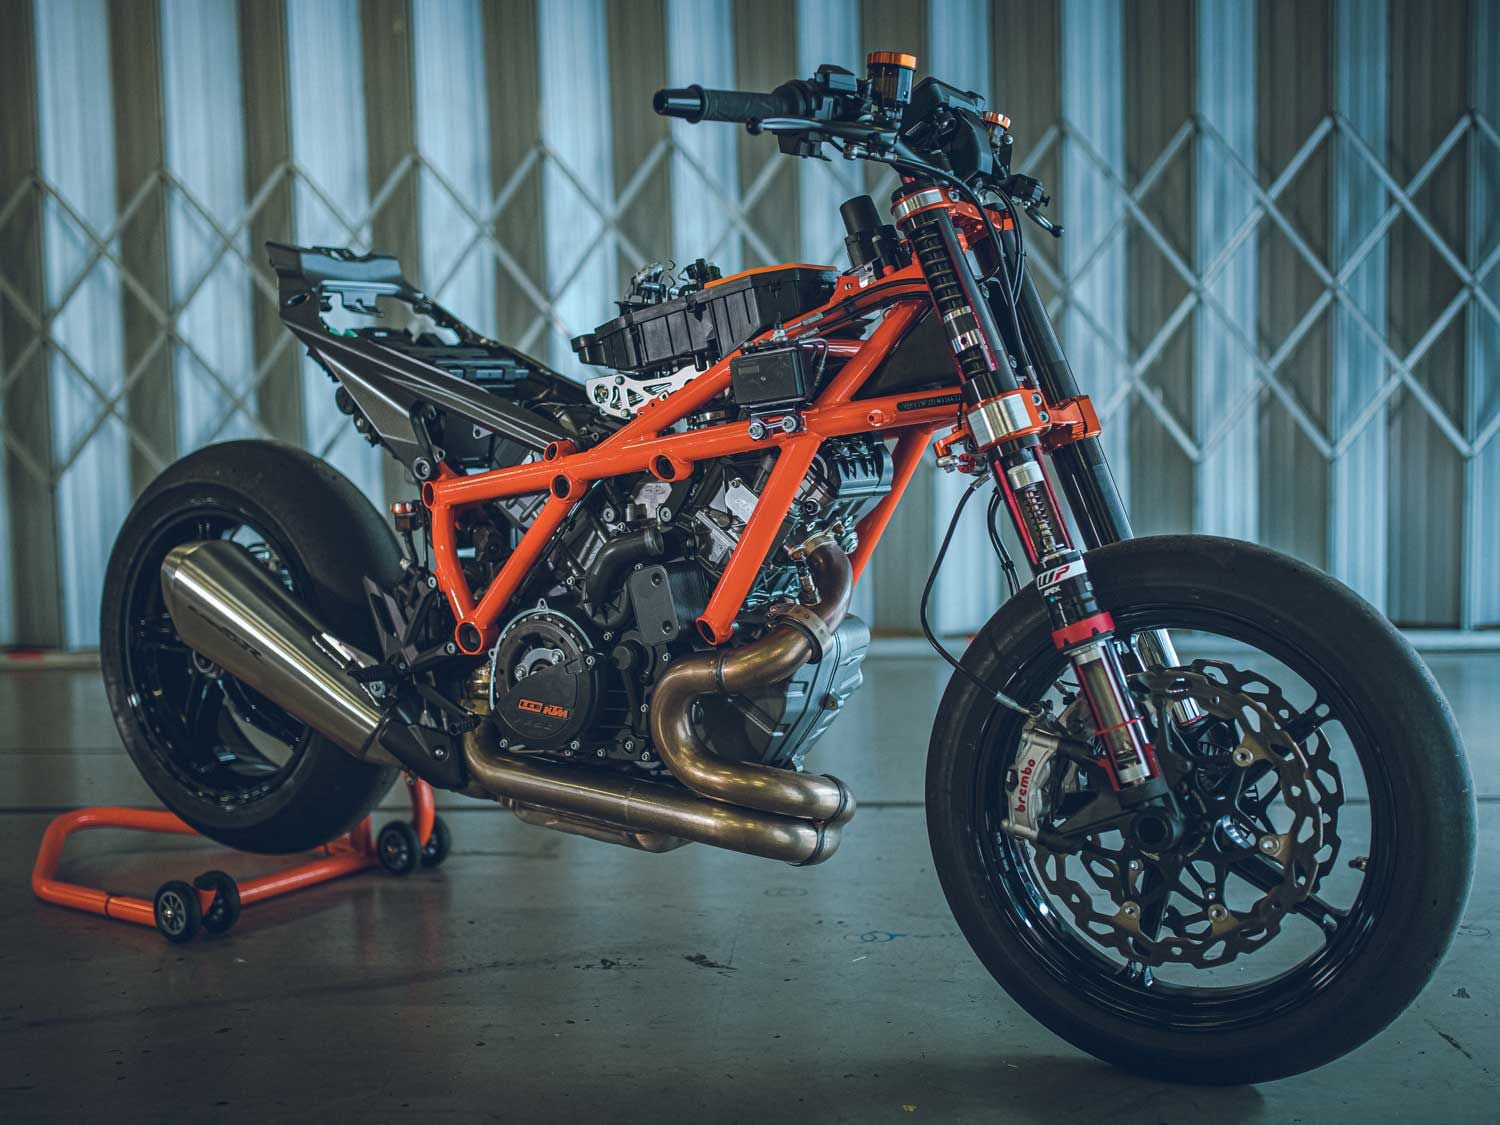 The 2020 1290 Super Duke R with its clothes off. Note the secondary showerhead-style fuel injectors, redesigned frame and subframe, and larger-diameter header pipes. These updates net a significantly improved riding dynamic.